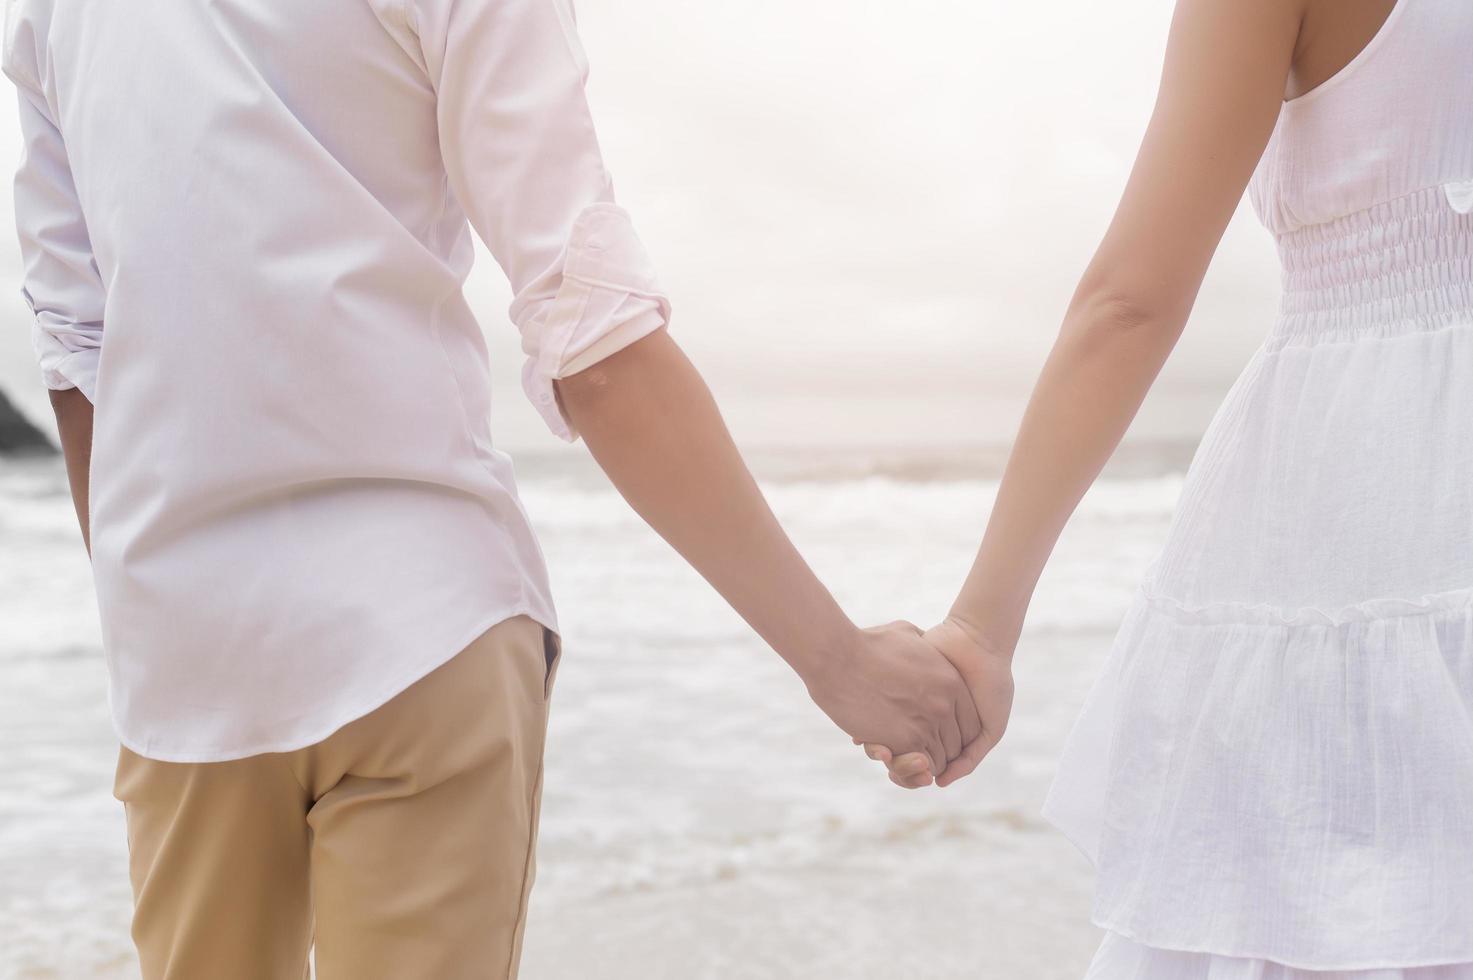 close up of a couple wearing white dress holding hands on the beach on holidays, travel, romantic, wedding concept photo